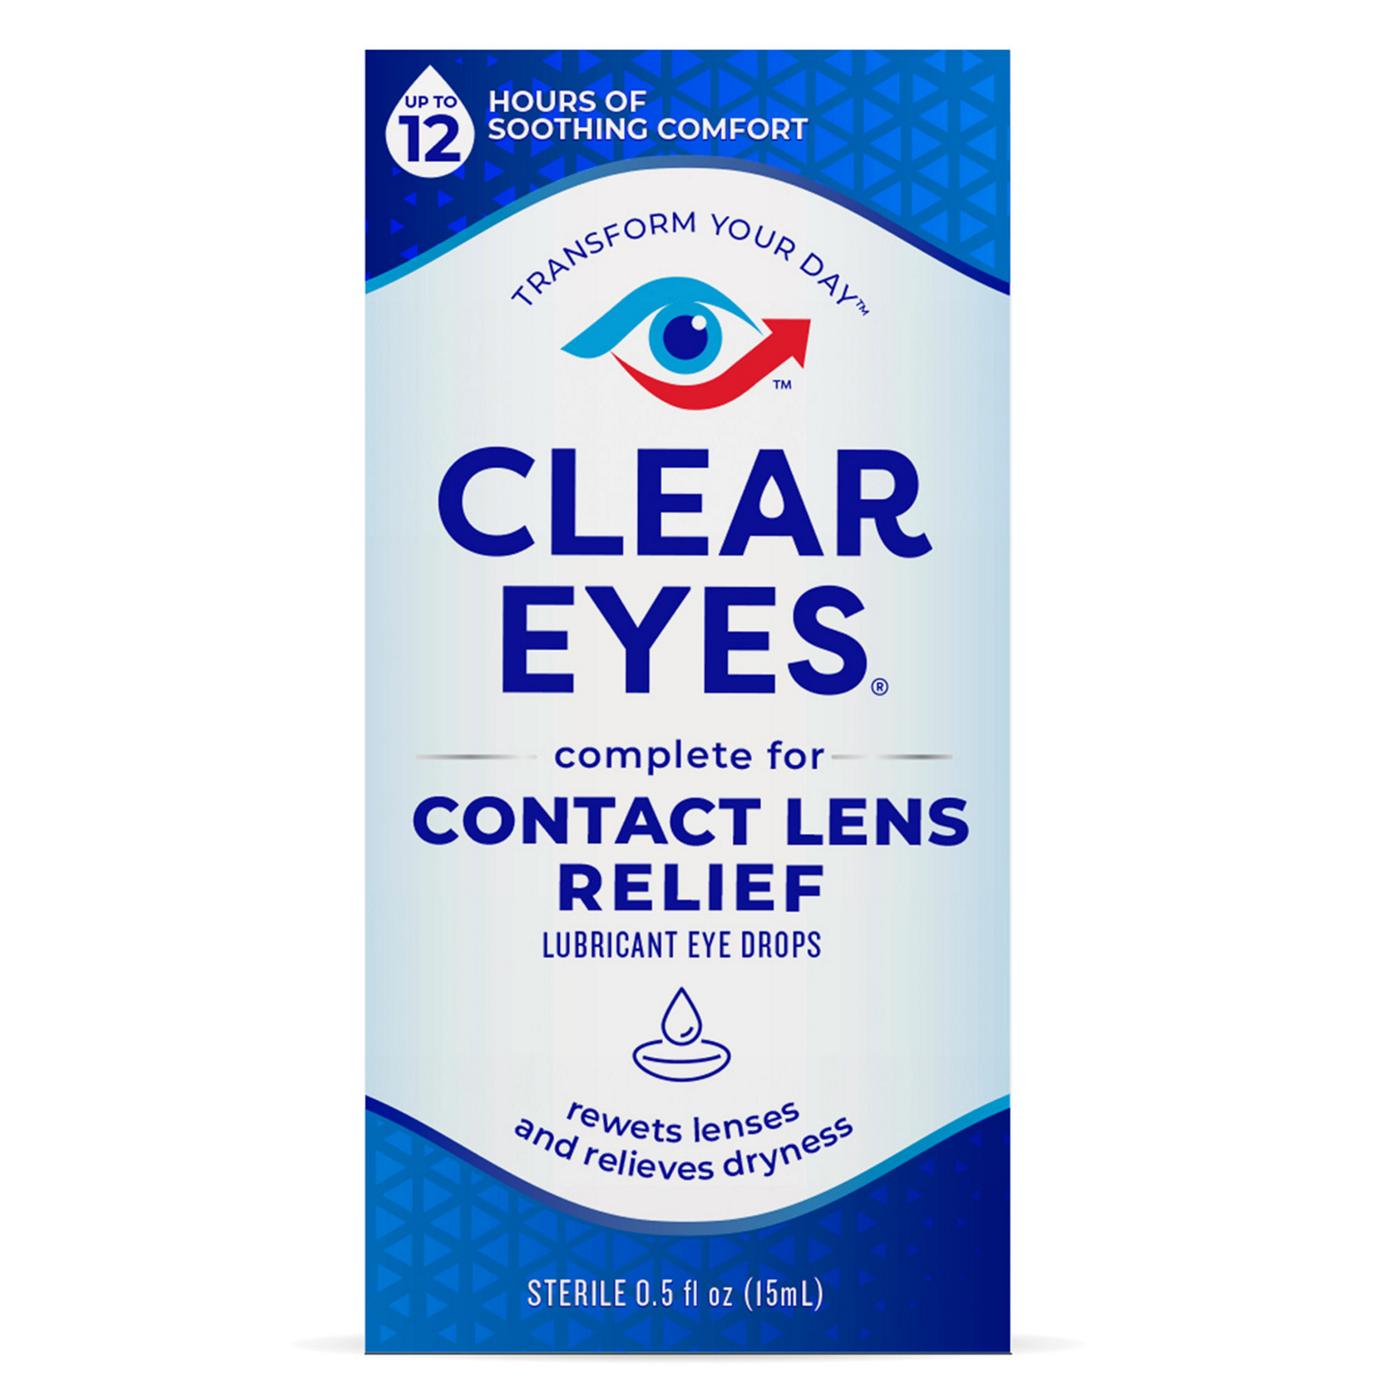 Clear Eyes Contact Lens Eye Drops; image 1 of 5